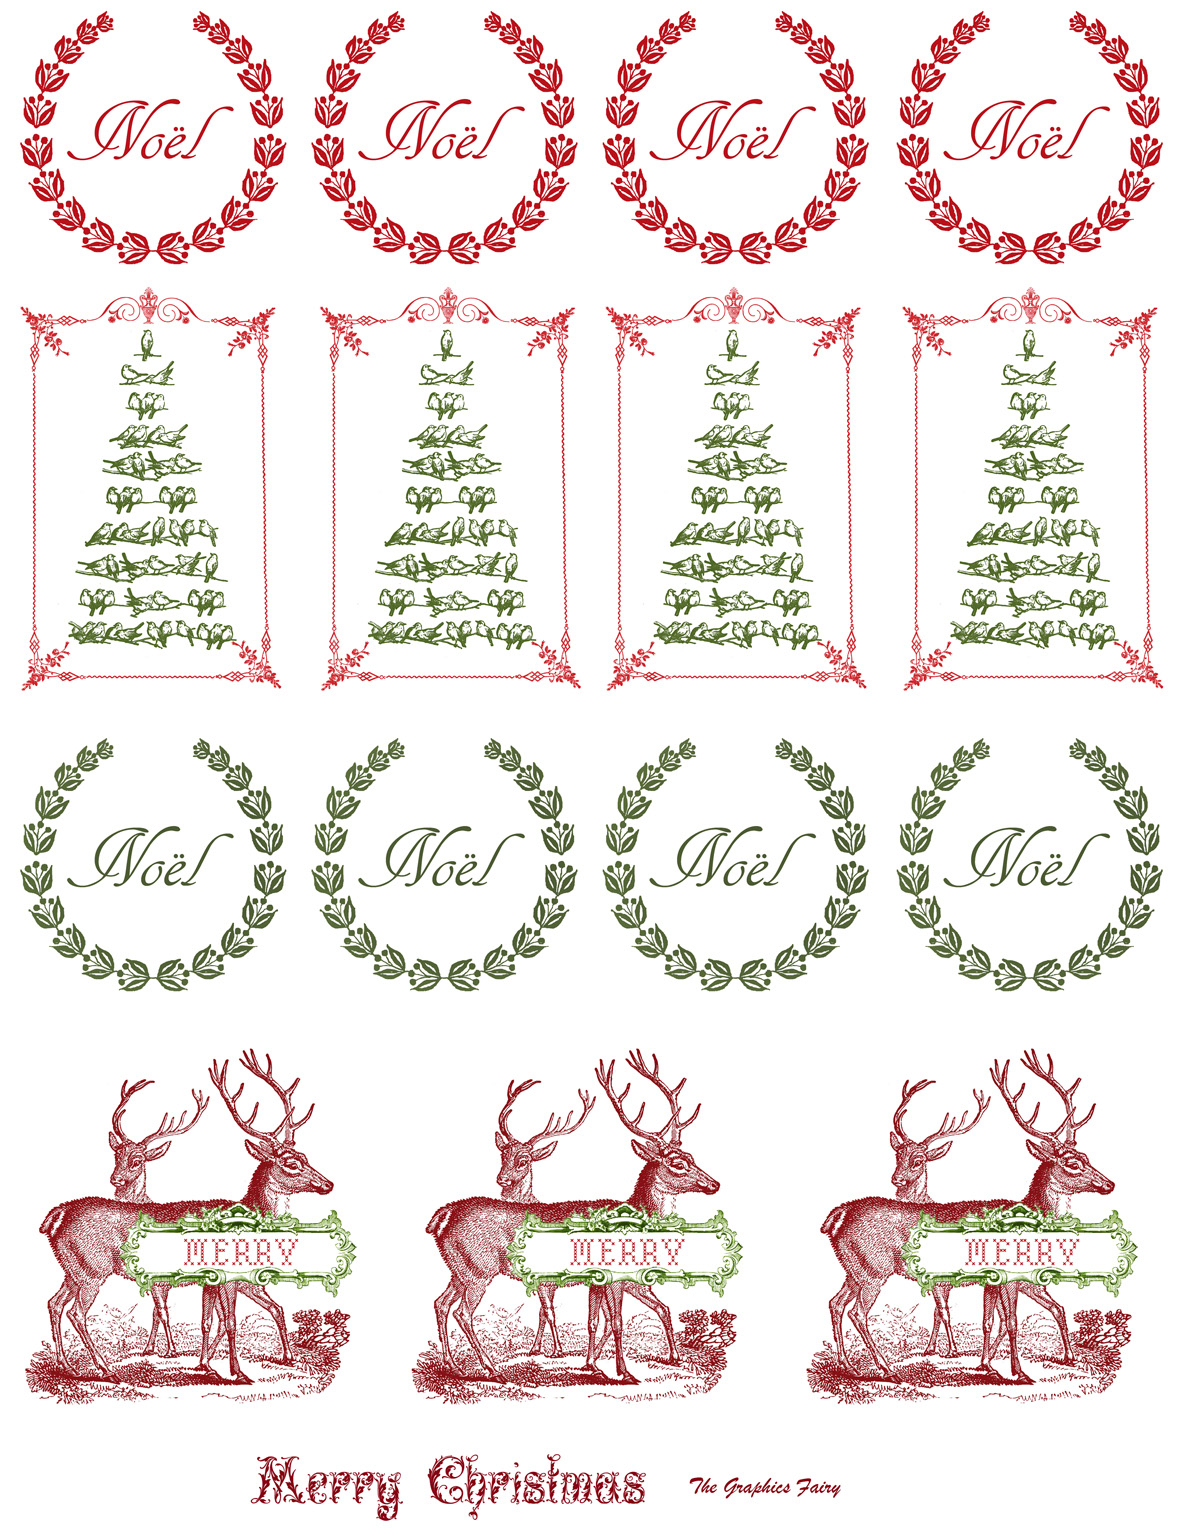 Printable - Vintage Christmas Stickers - The Graphics Fairy - Free Printable Holiday Stickers